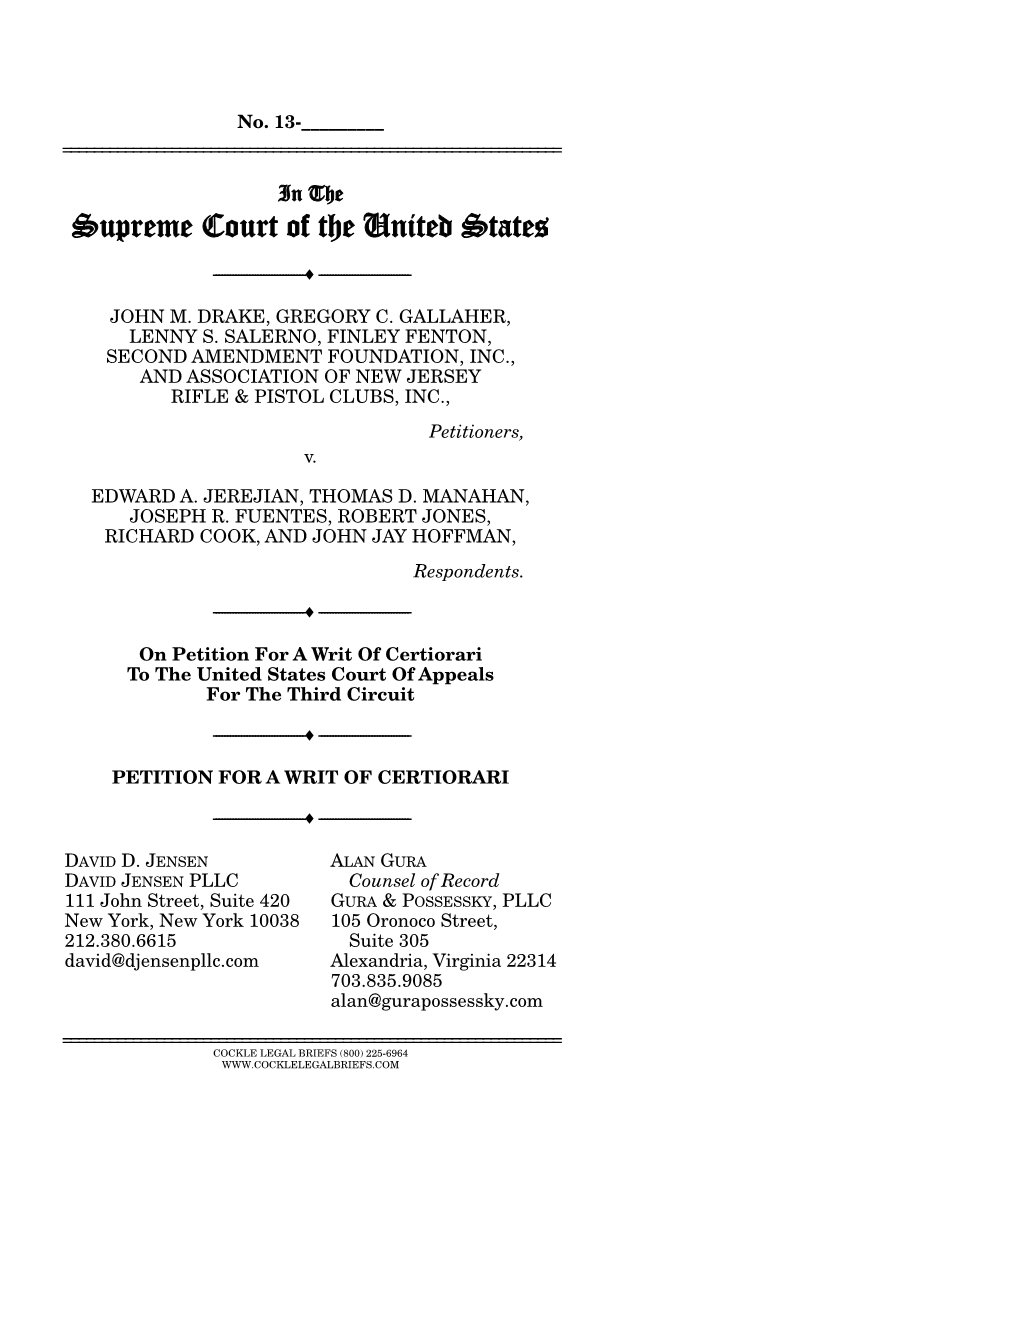 Petition for a Writ of Certiorari to the United States Court of Appeals for the Third Circuit